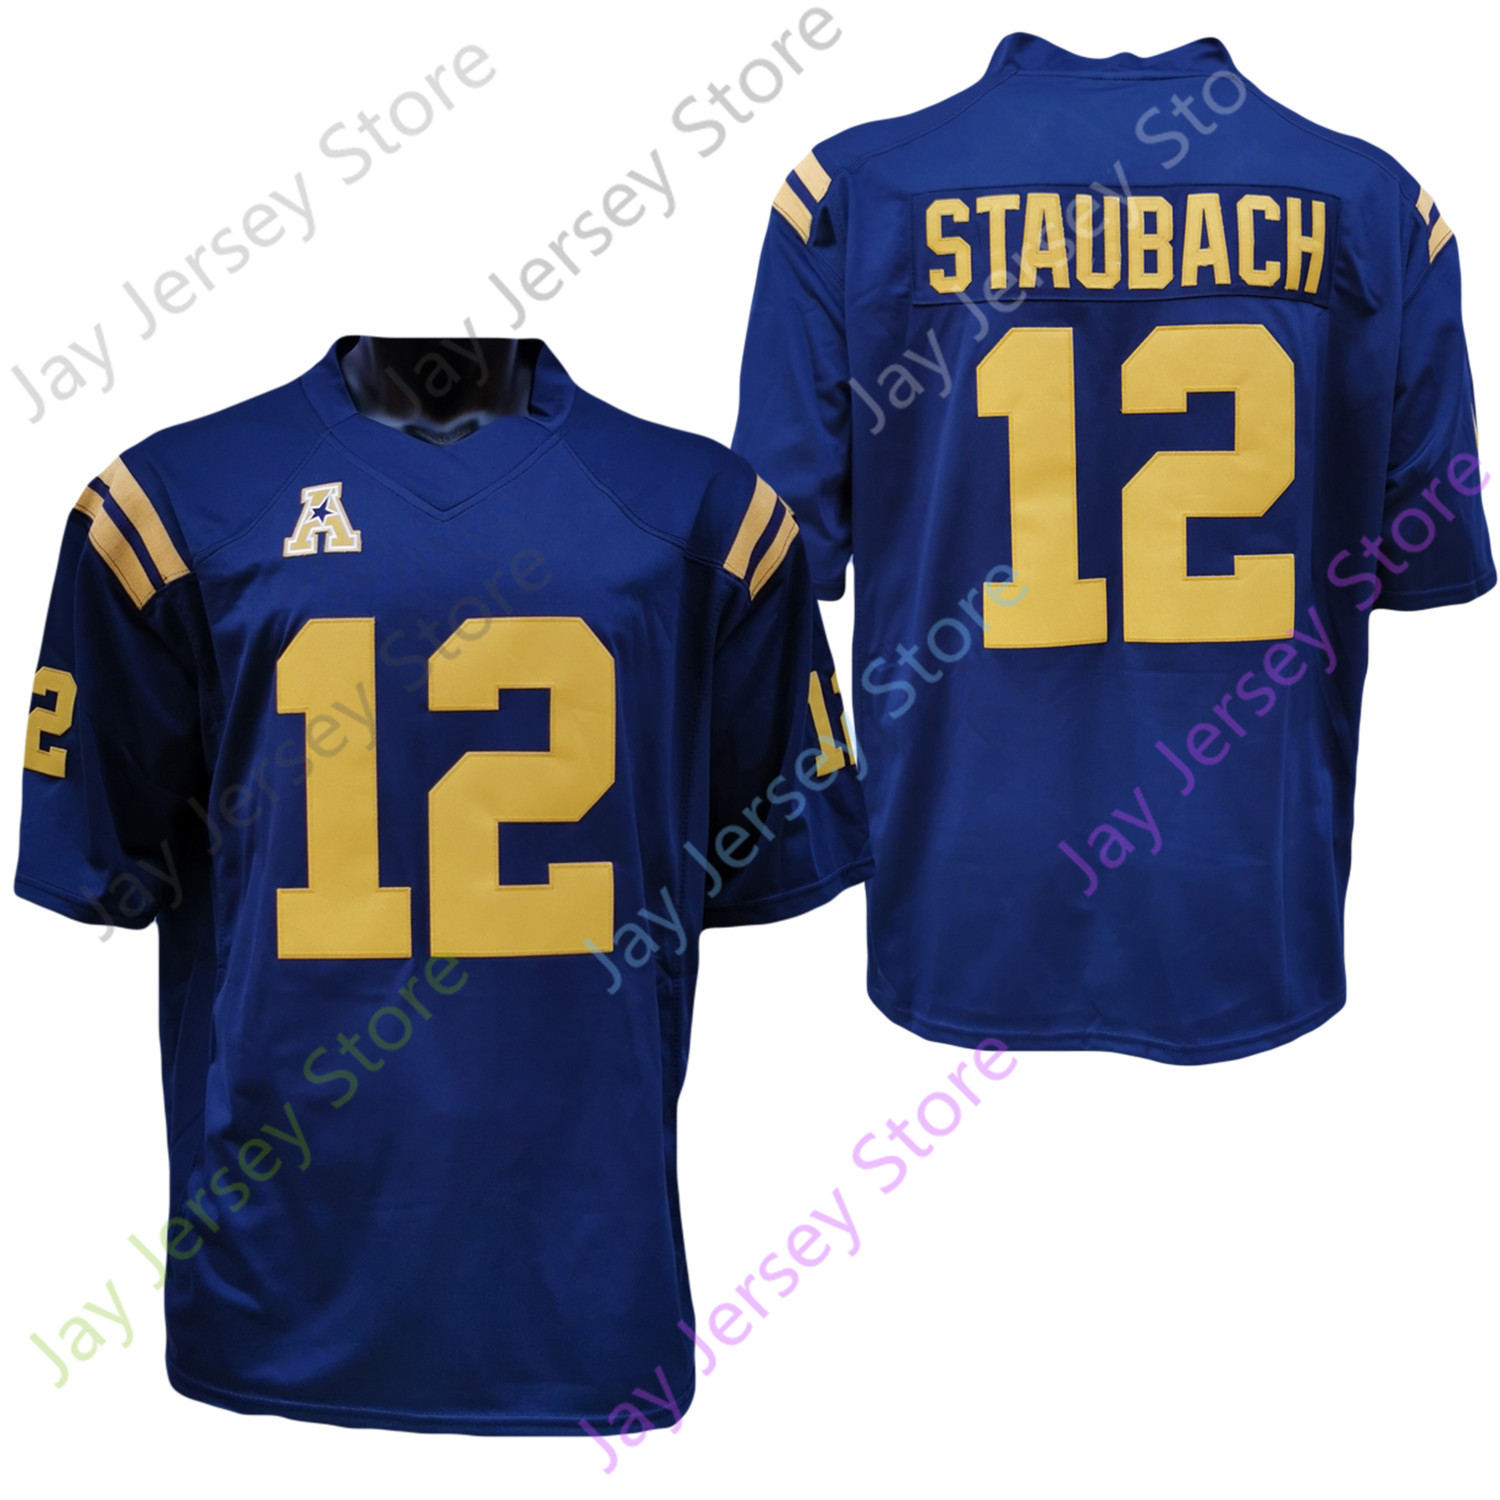 roger staubach jersey for sale